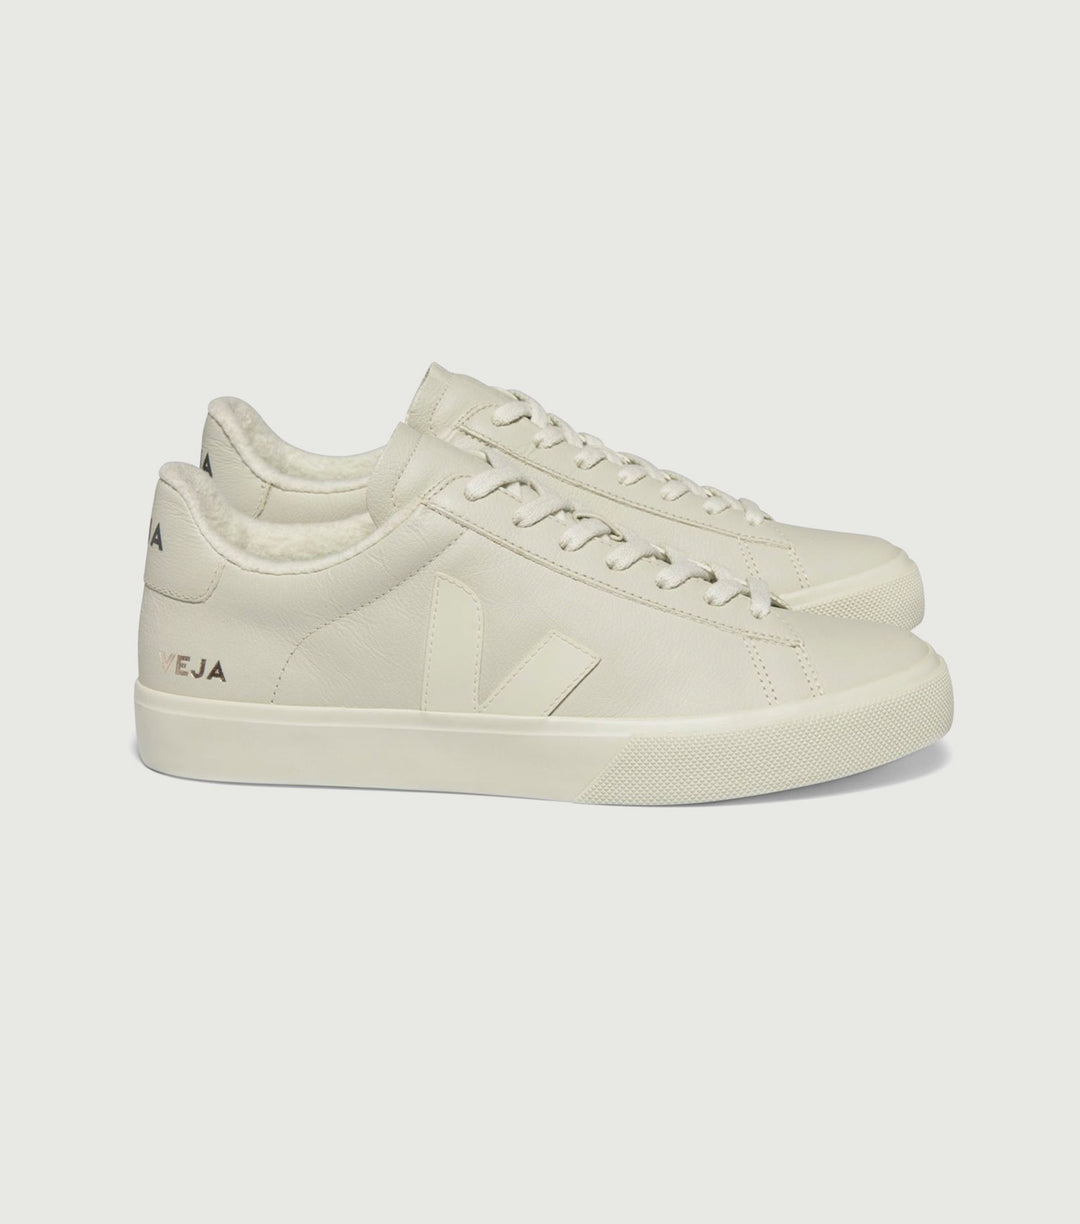 Campo W Chfree Leather Full Pierre - Veja